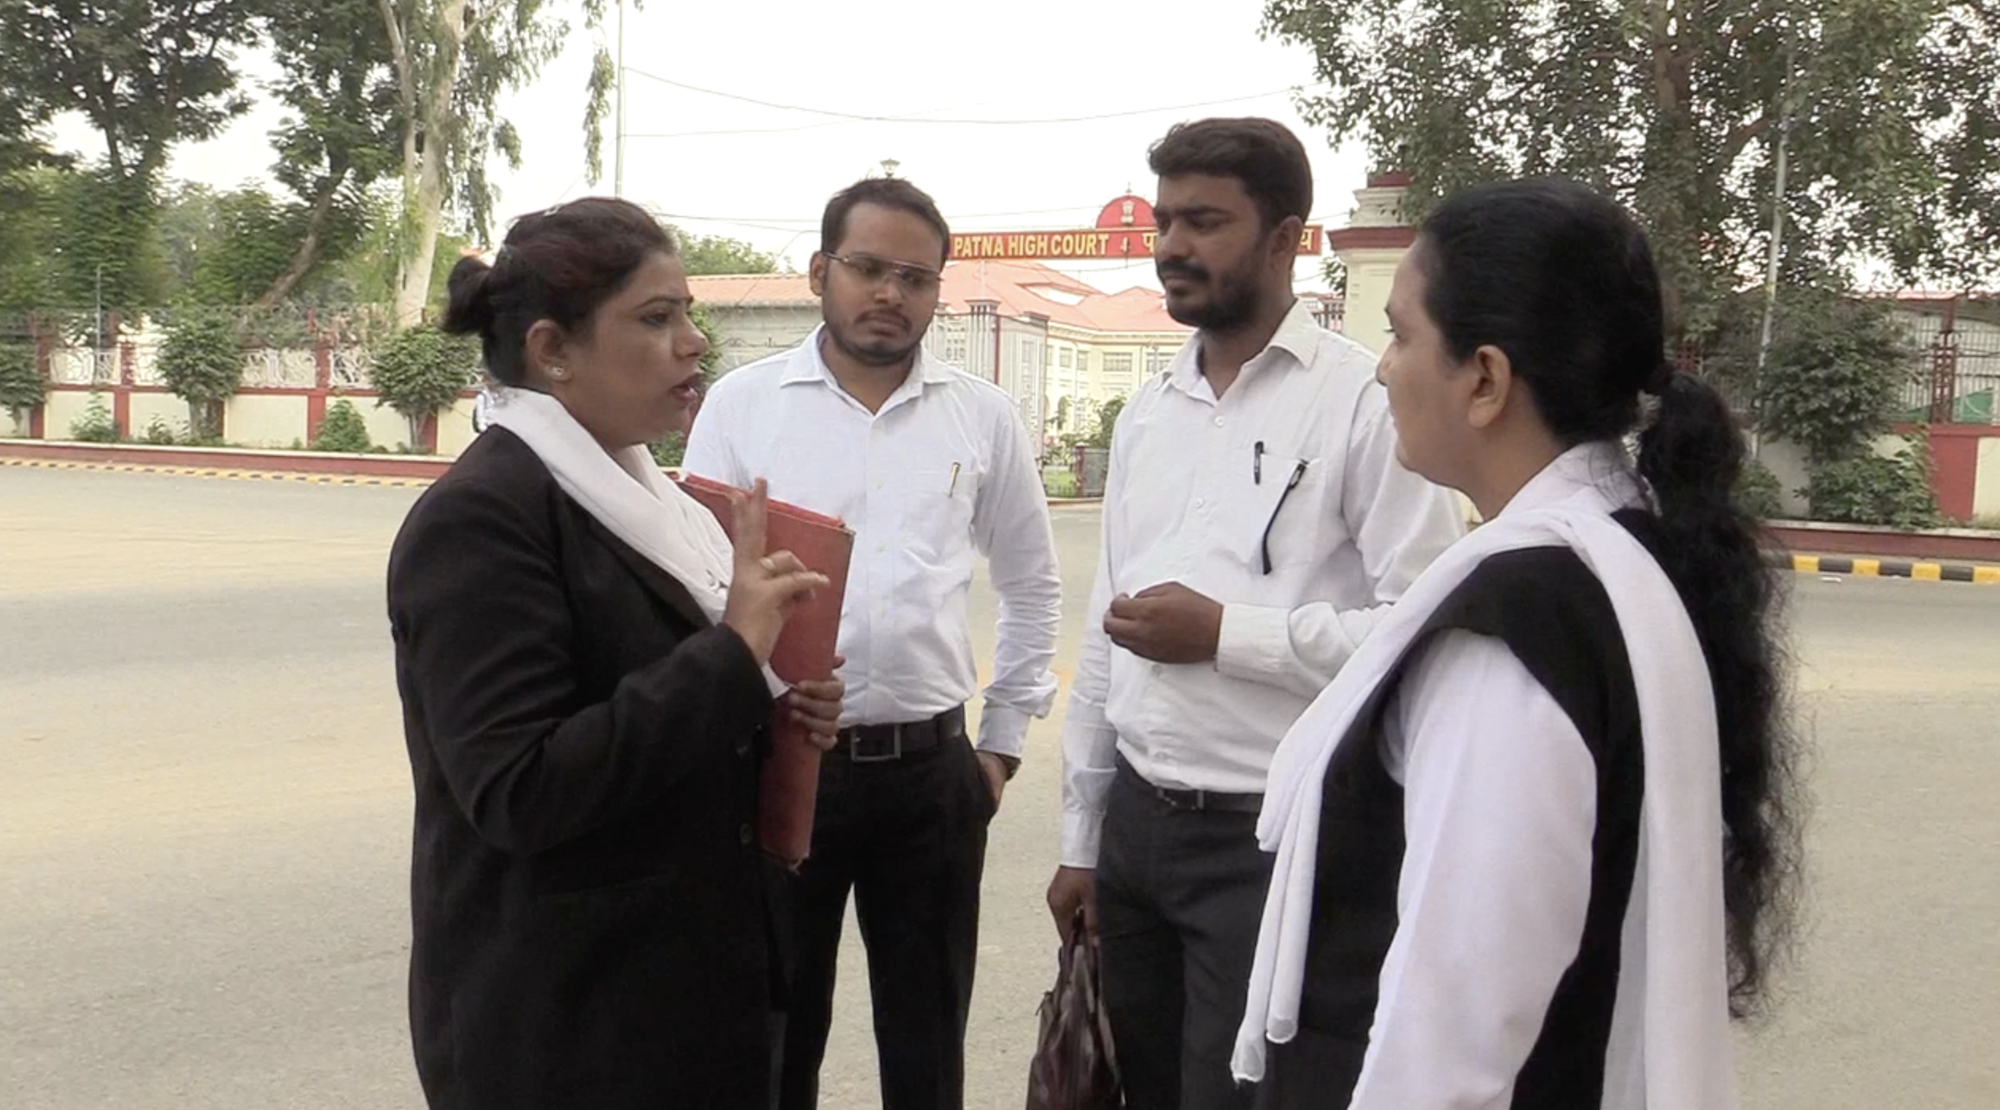 Two women and two men in lawyer attire standing on the road. Savita is explaining something to her colleagues